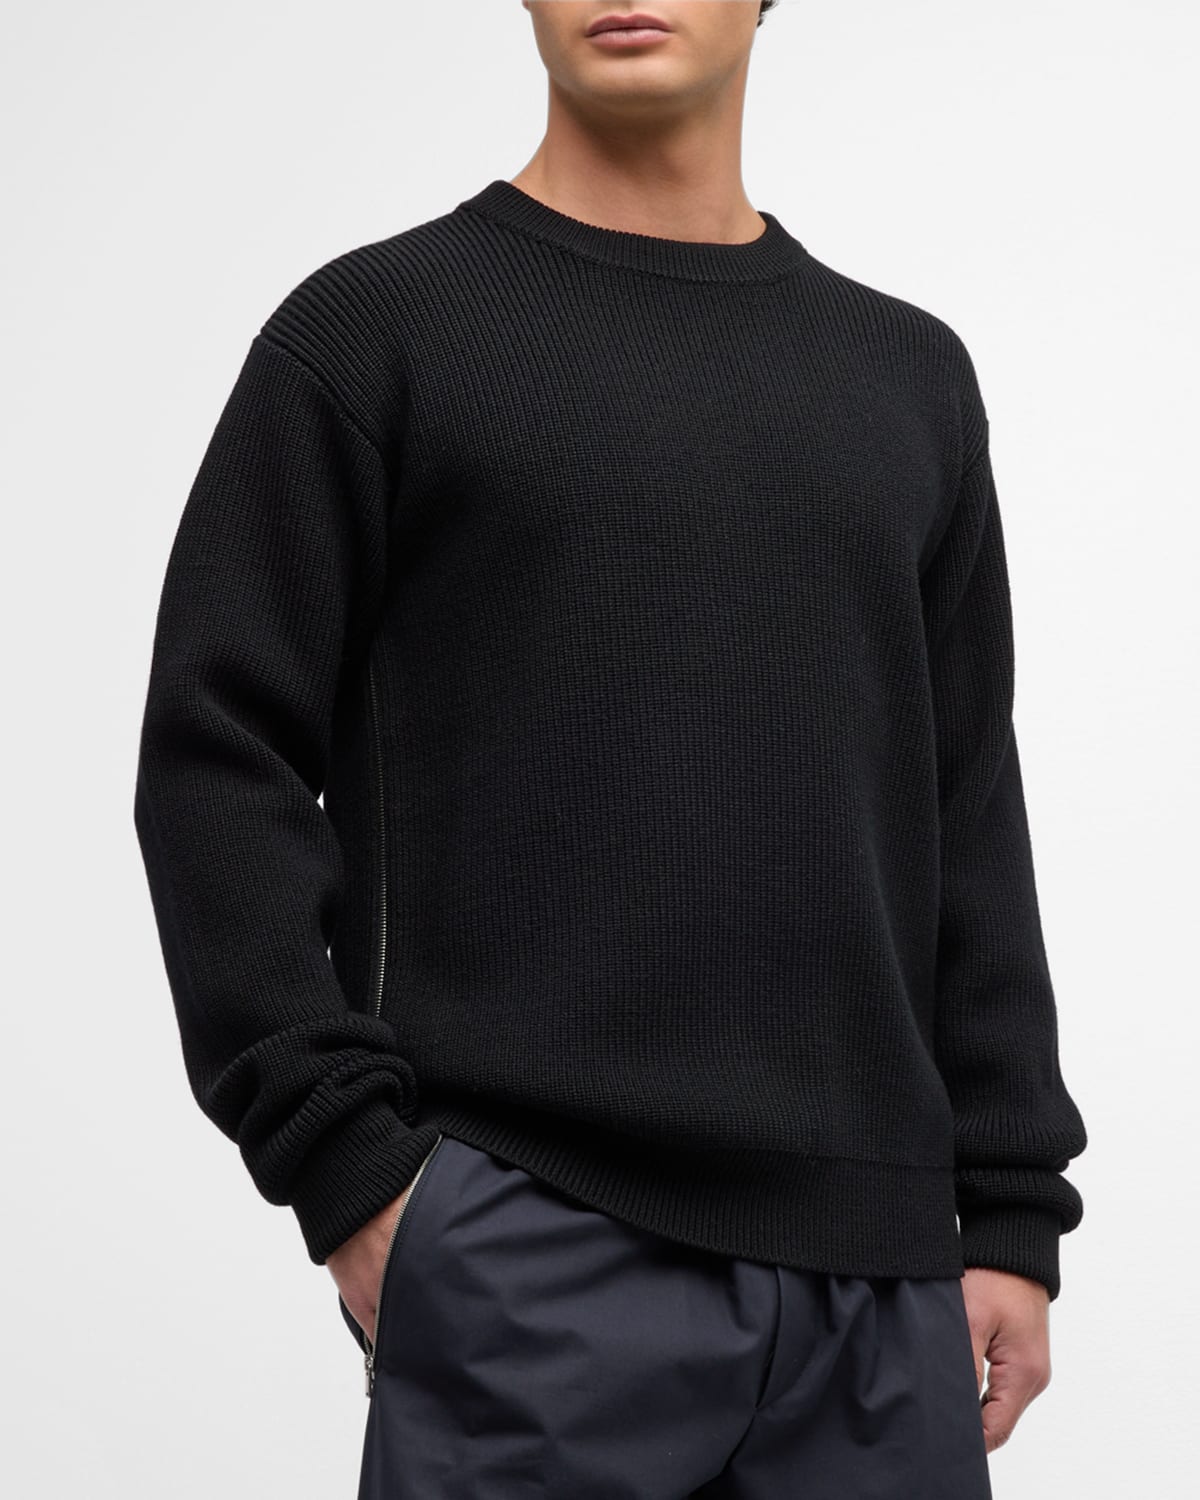 Men's Wool Sweater with Side Zippers